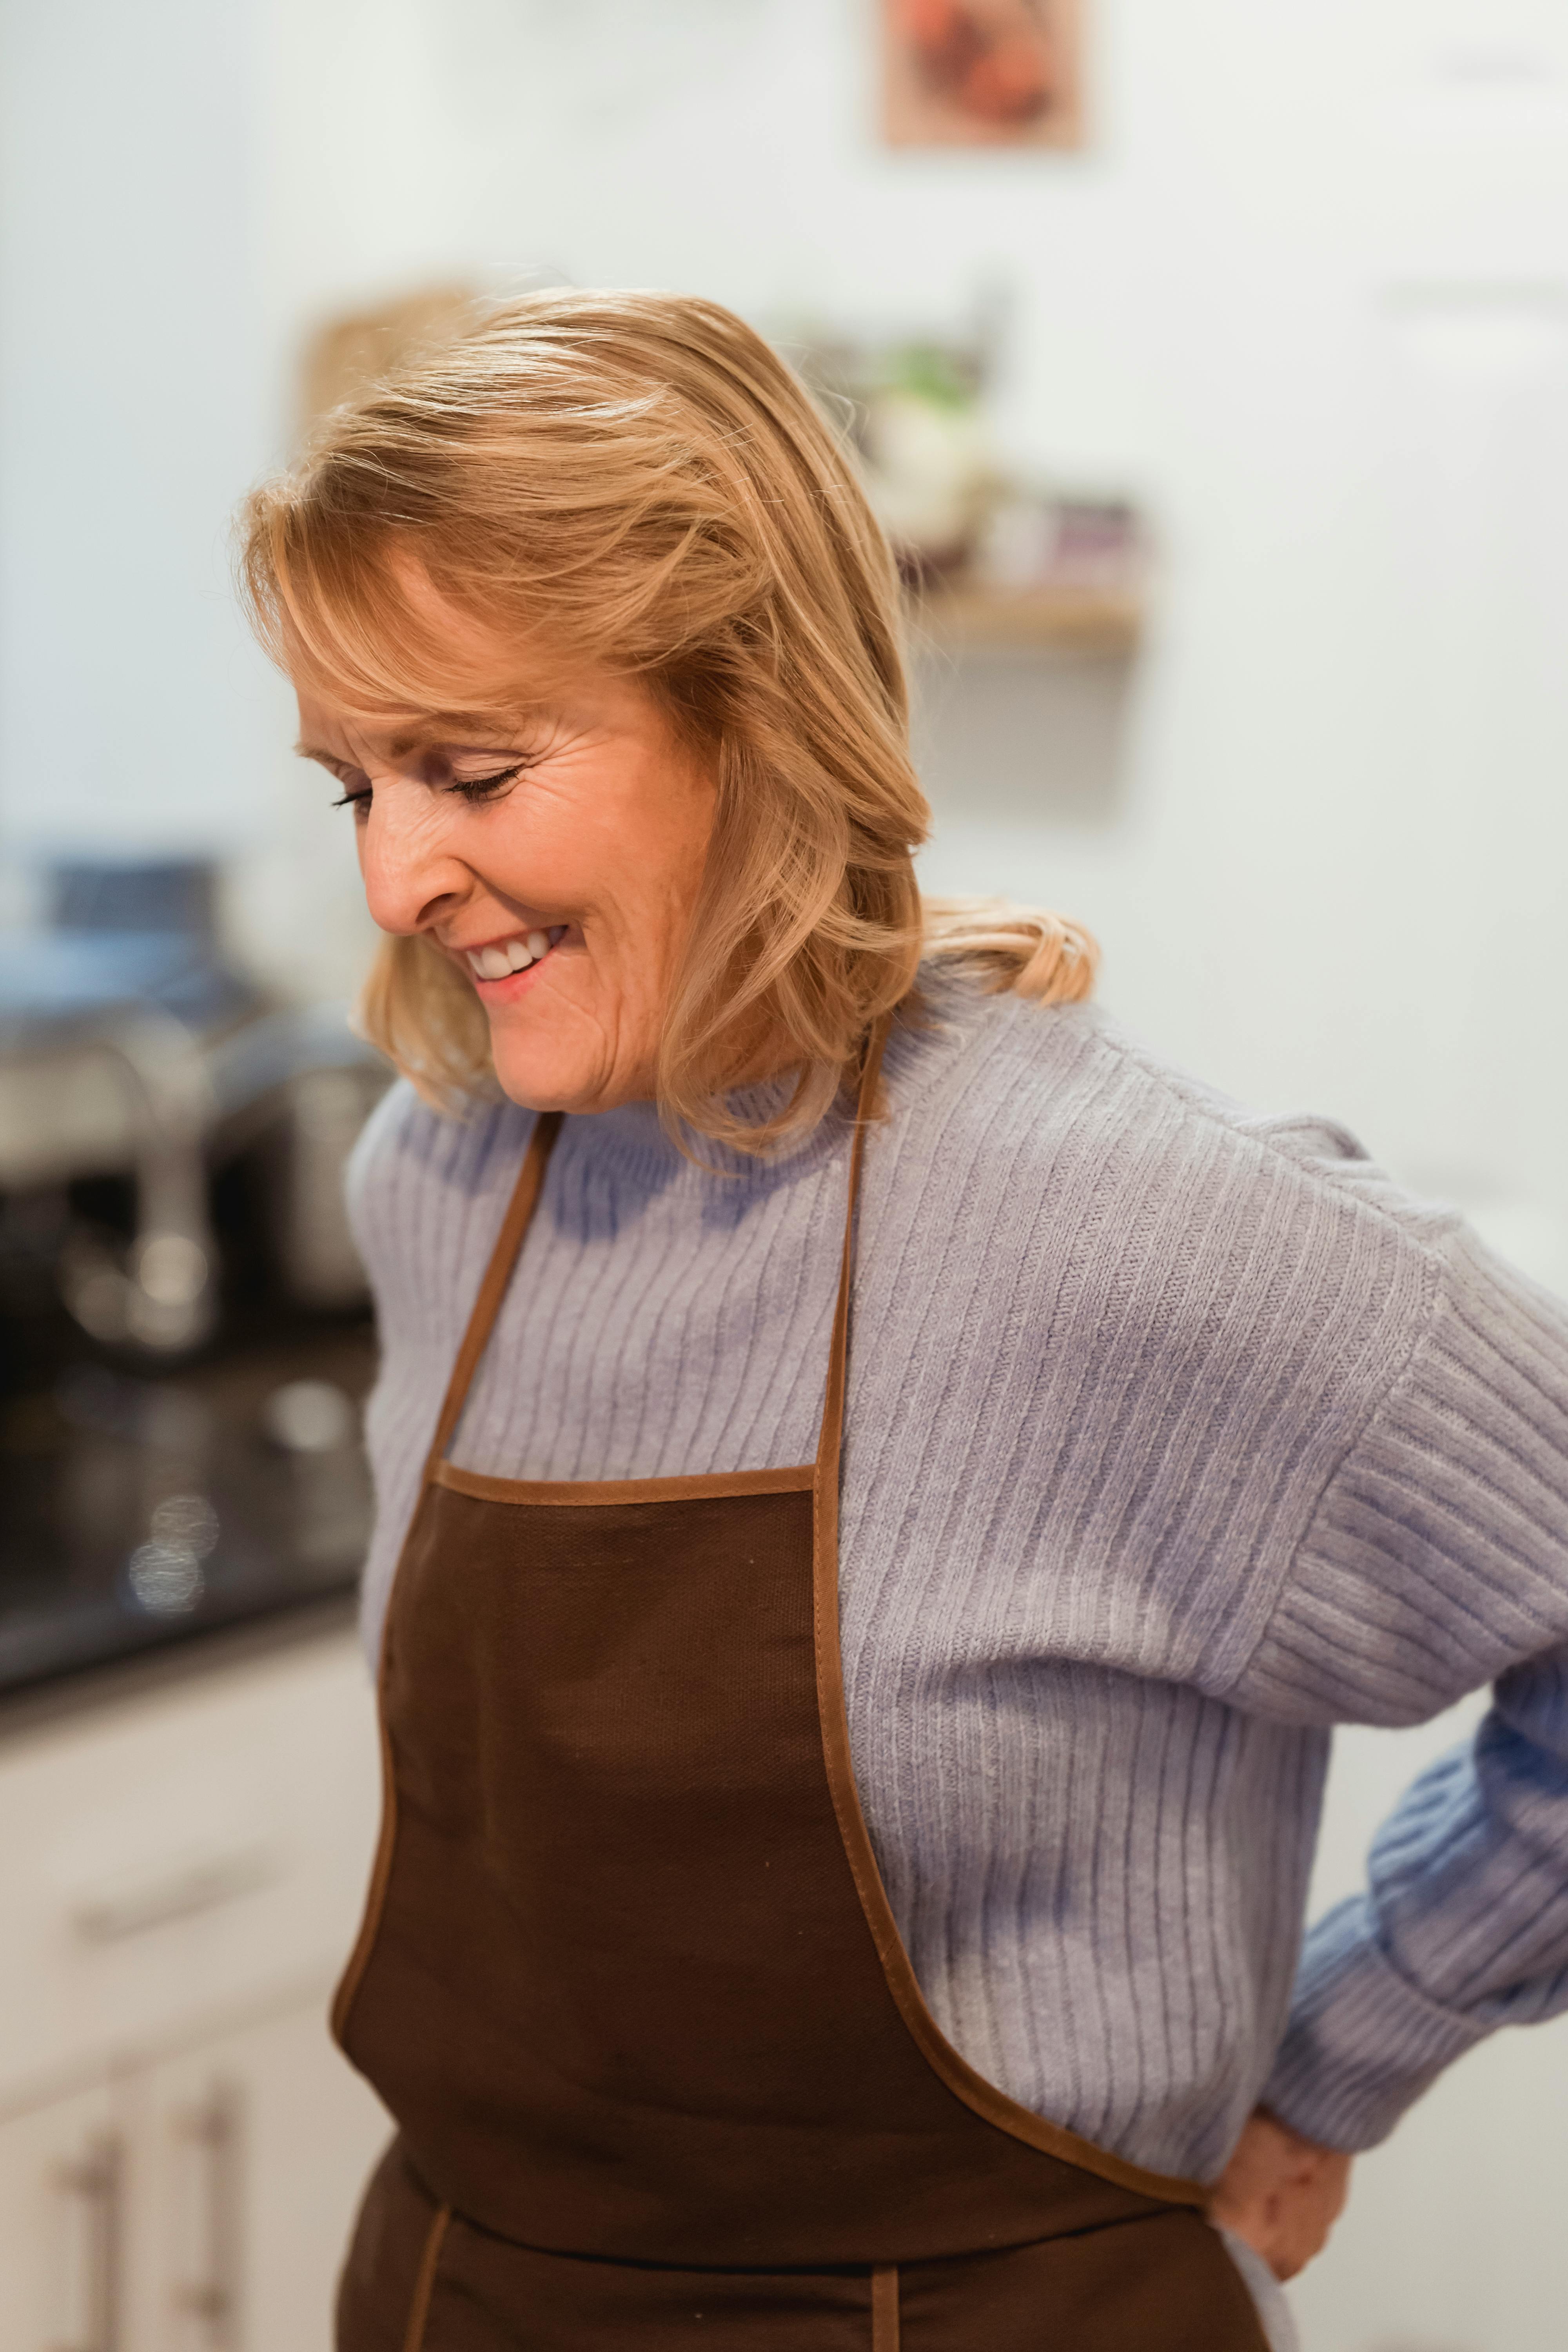 A woman in an apron while standing next to the kitchen counter | Source: Pexels